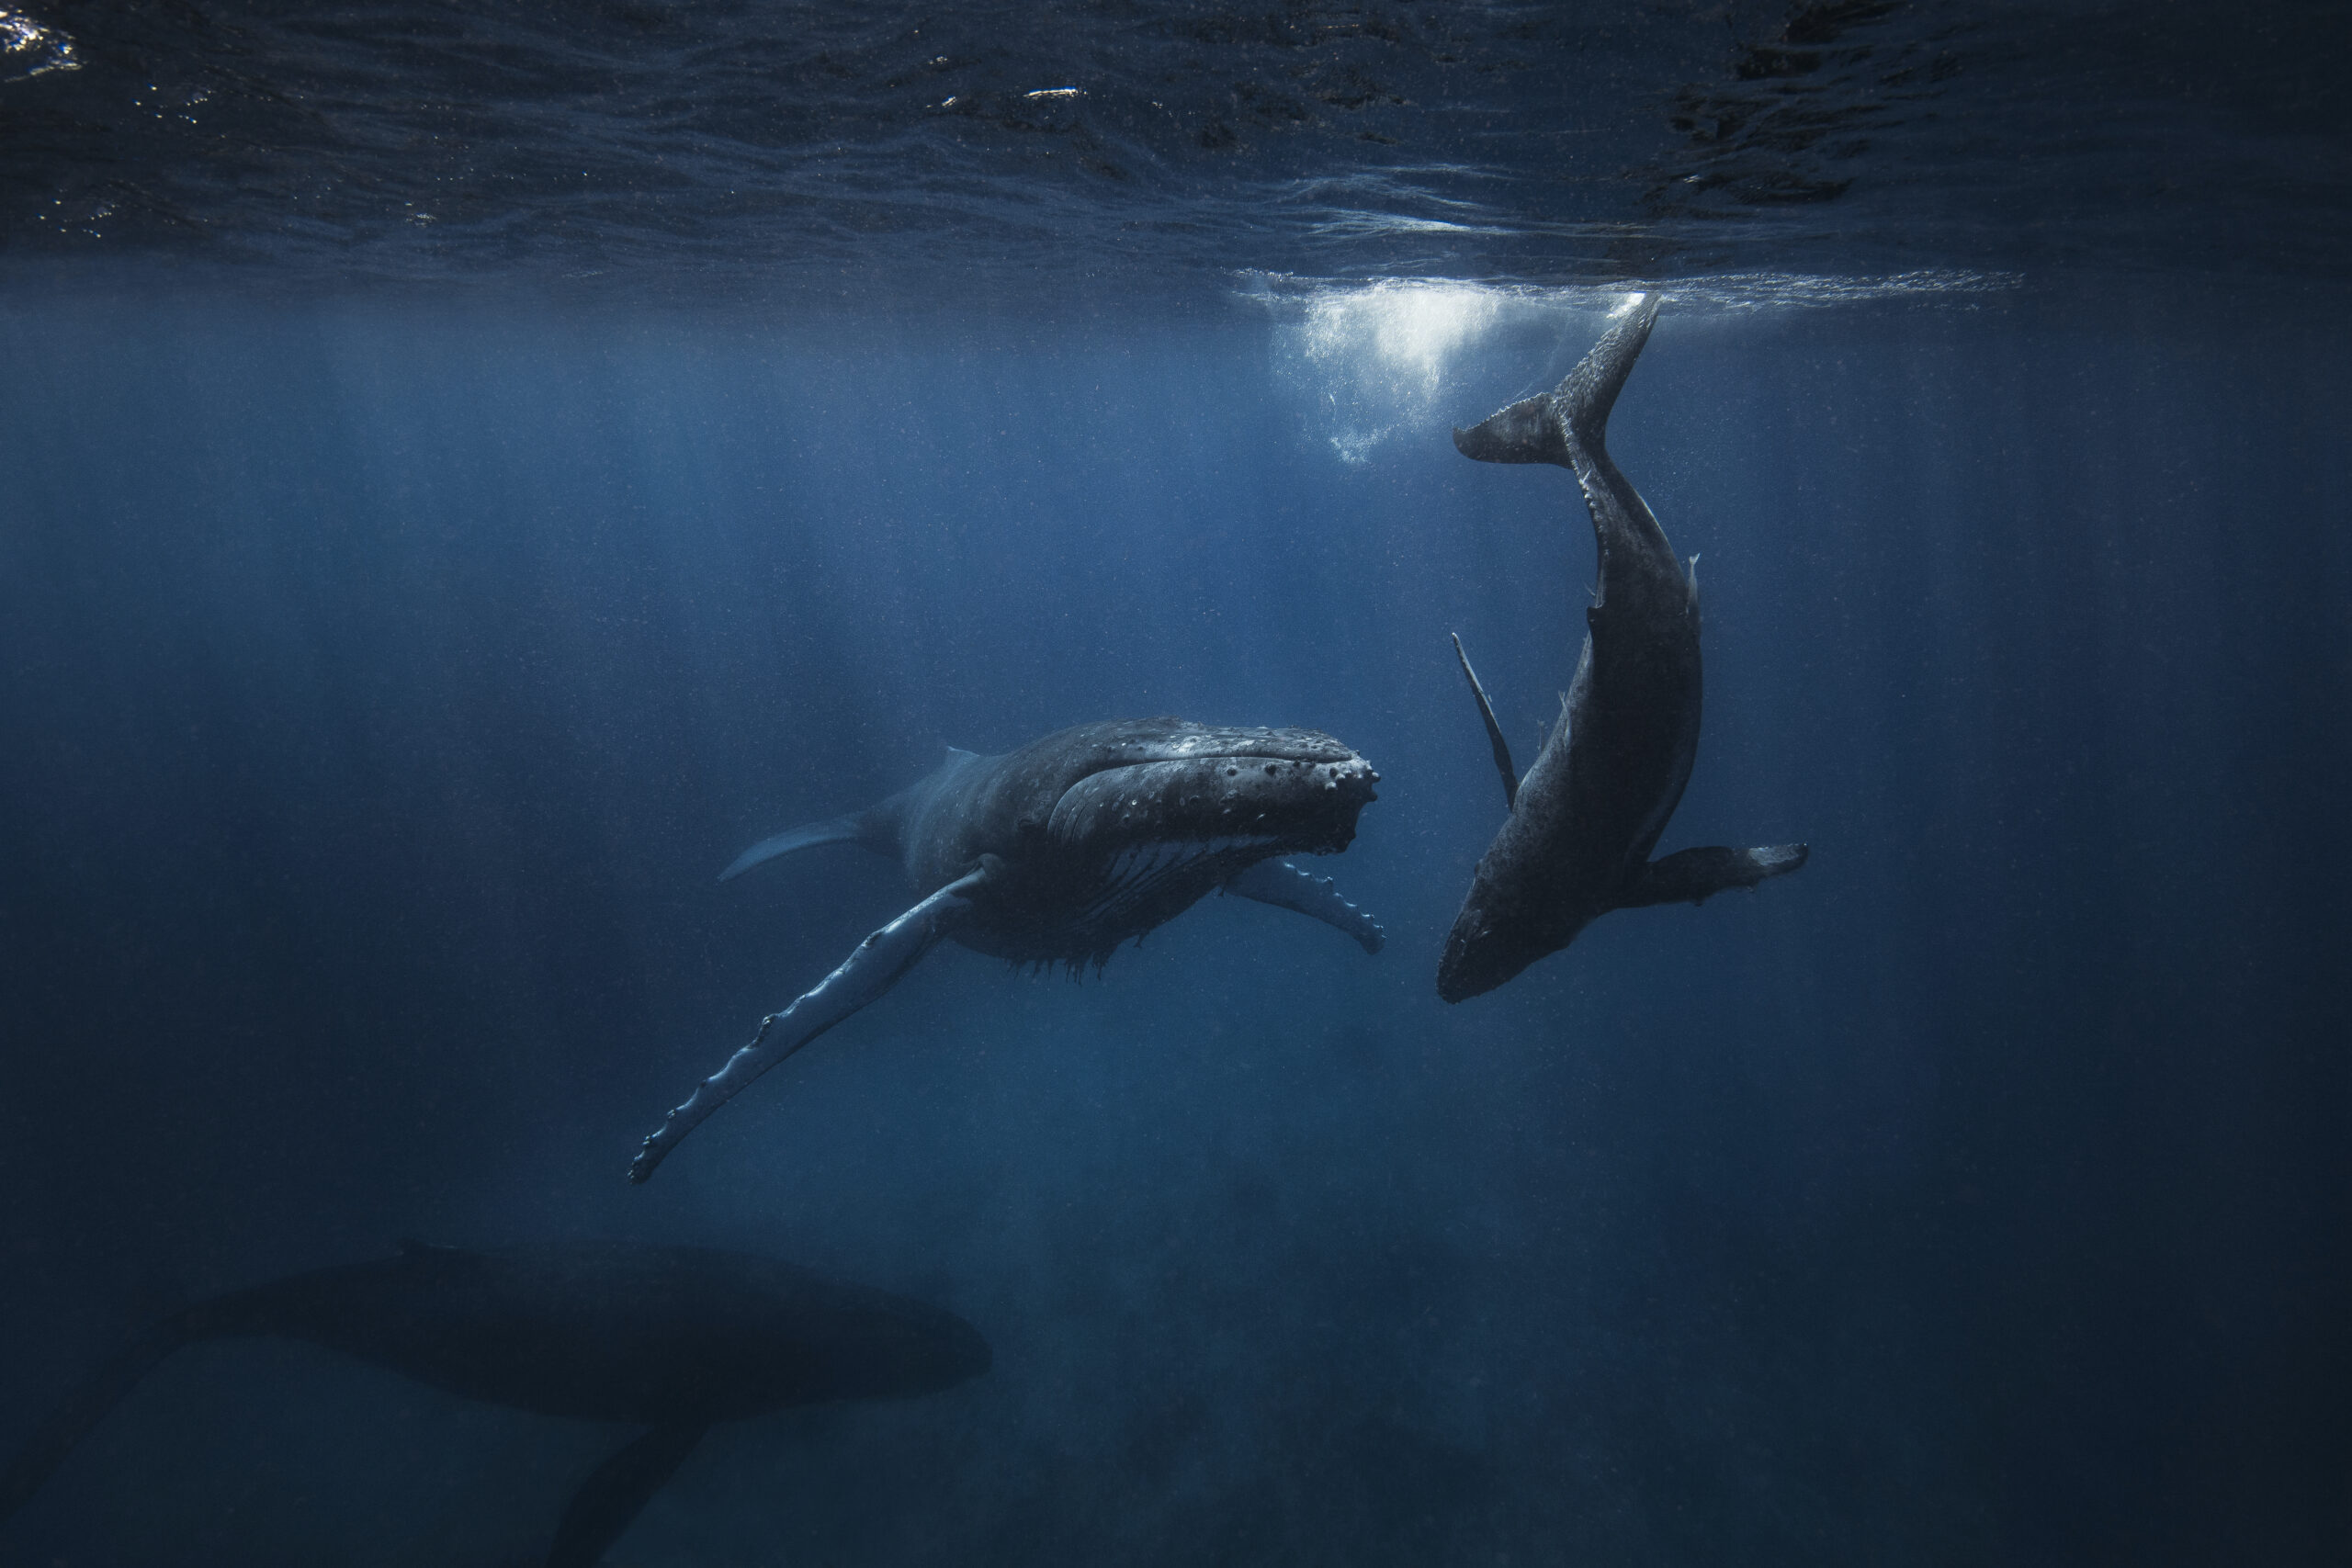 A Humpback Whale and her calf swimming below oceans surface